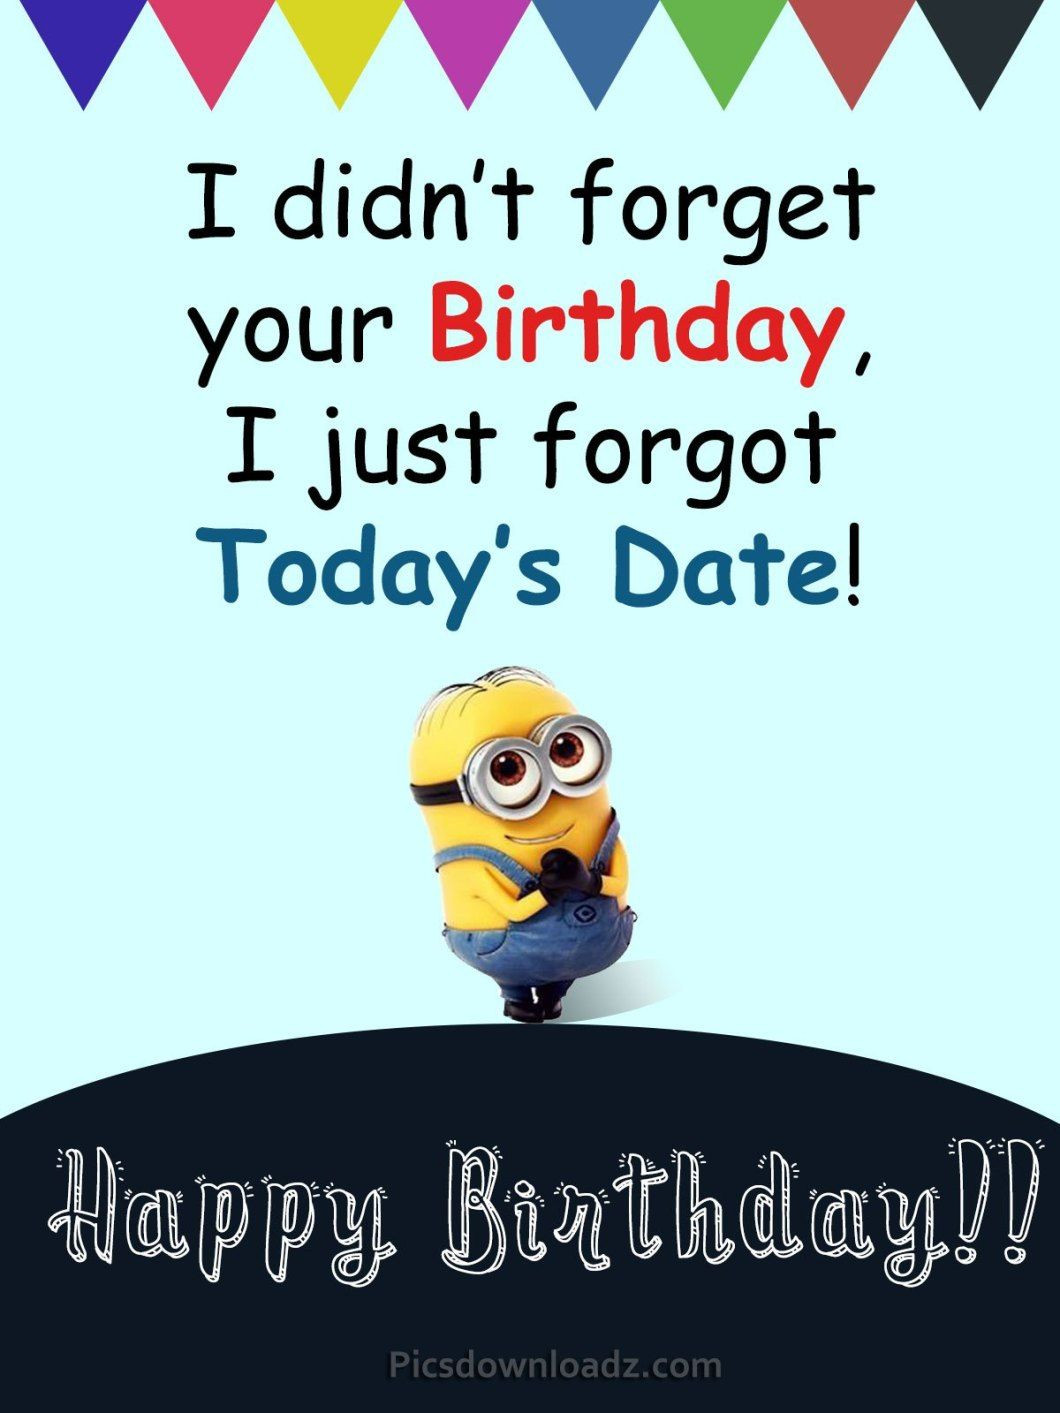 Funny Birthday Wishes Friend
 Happy birthday wishes for your best friend